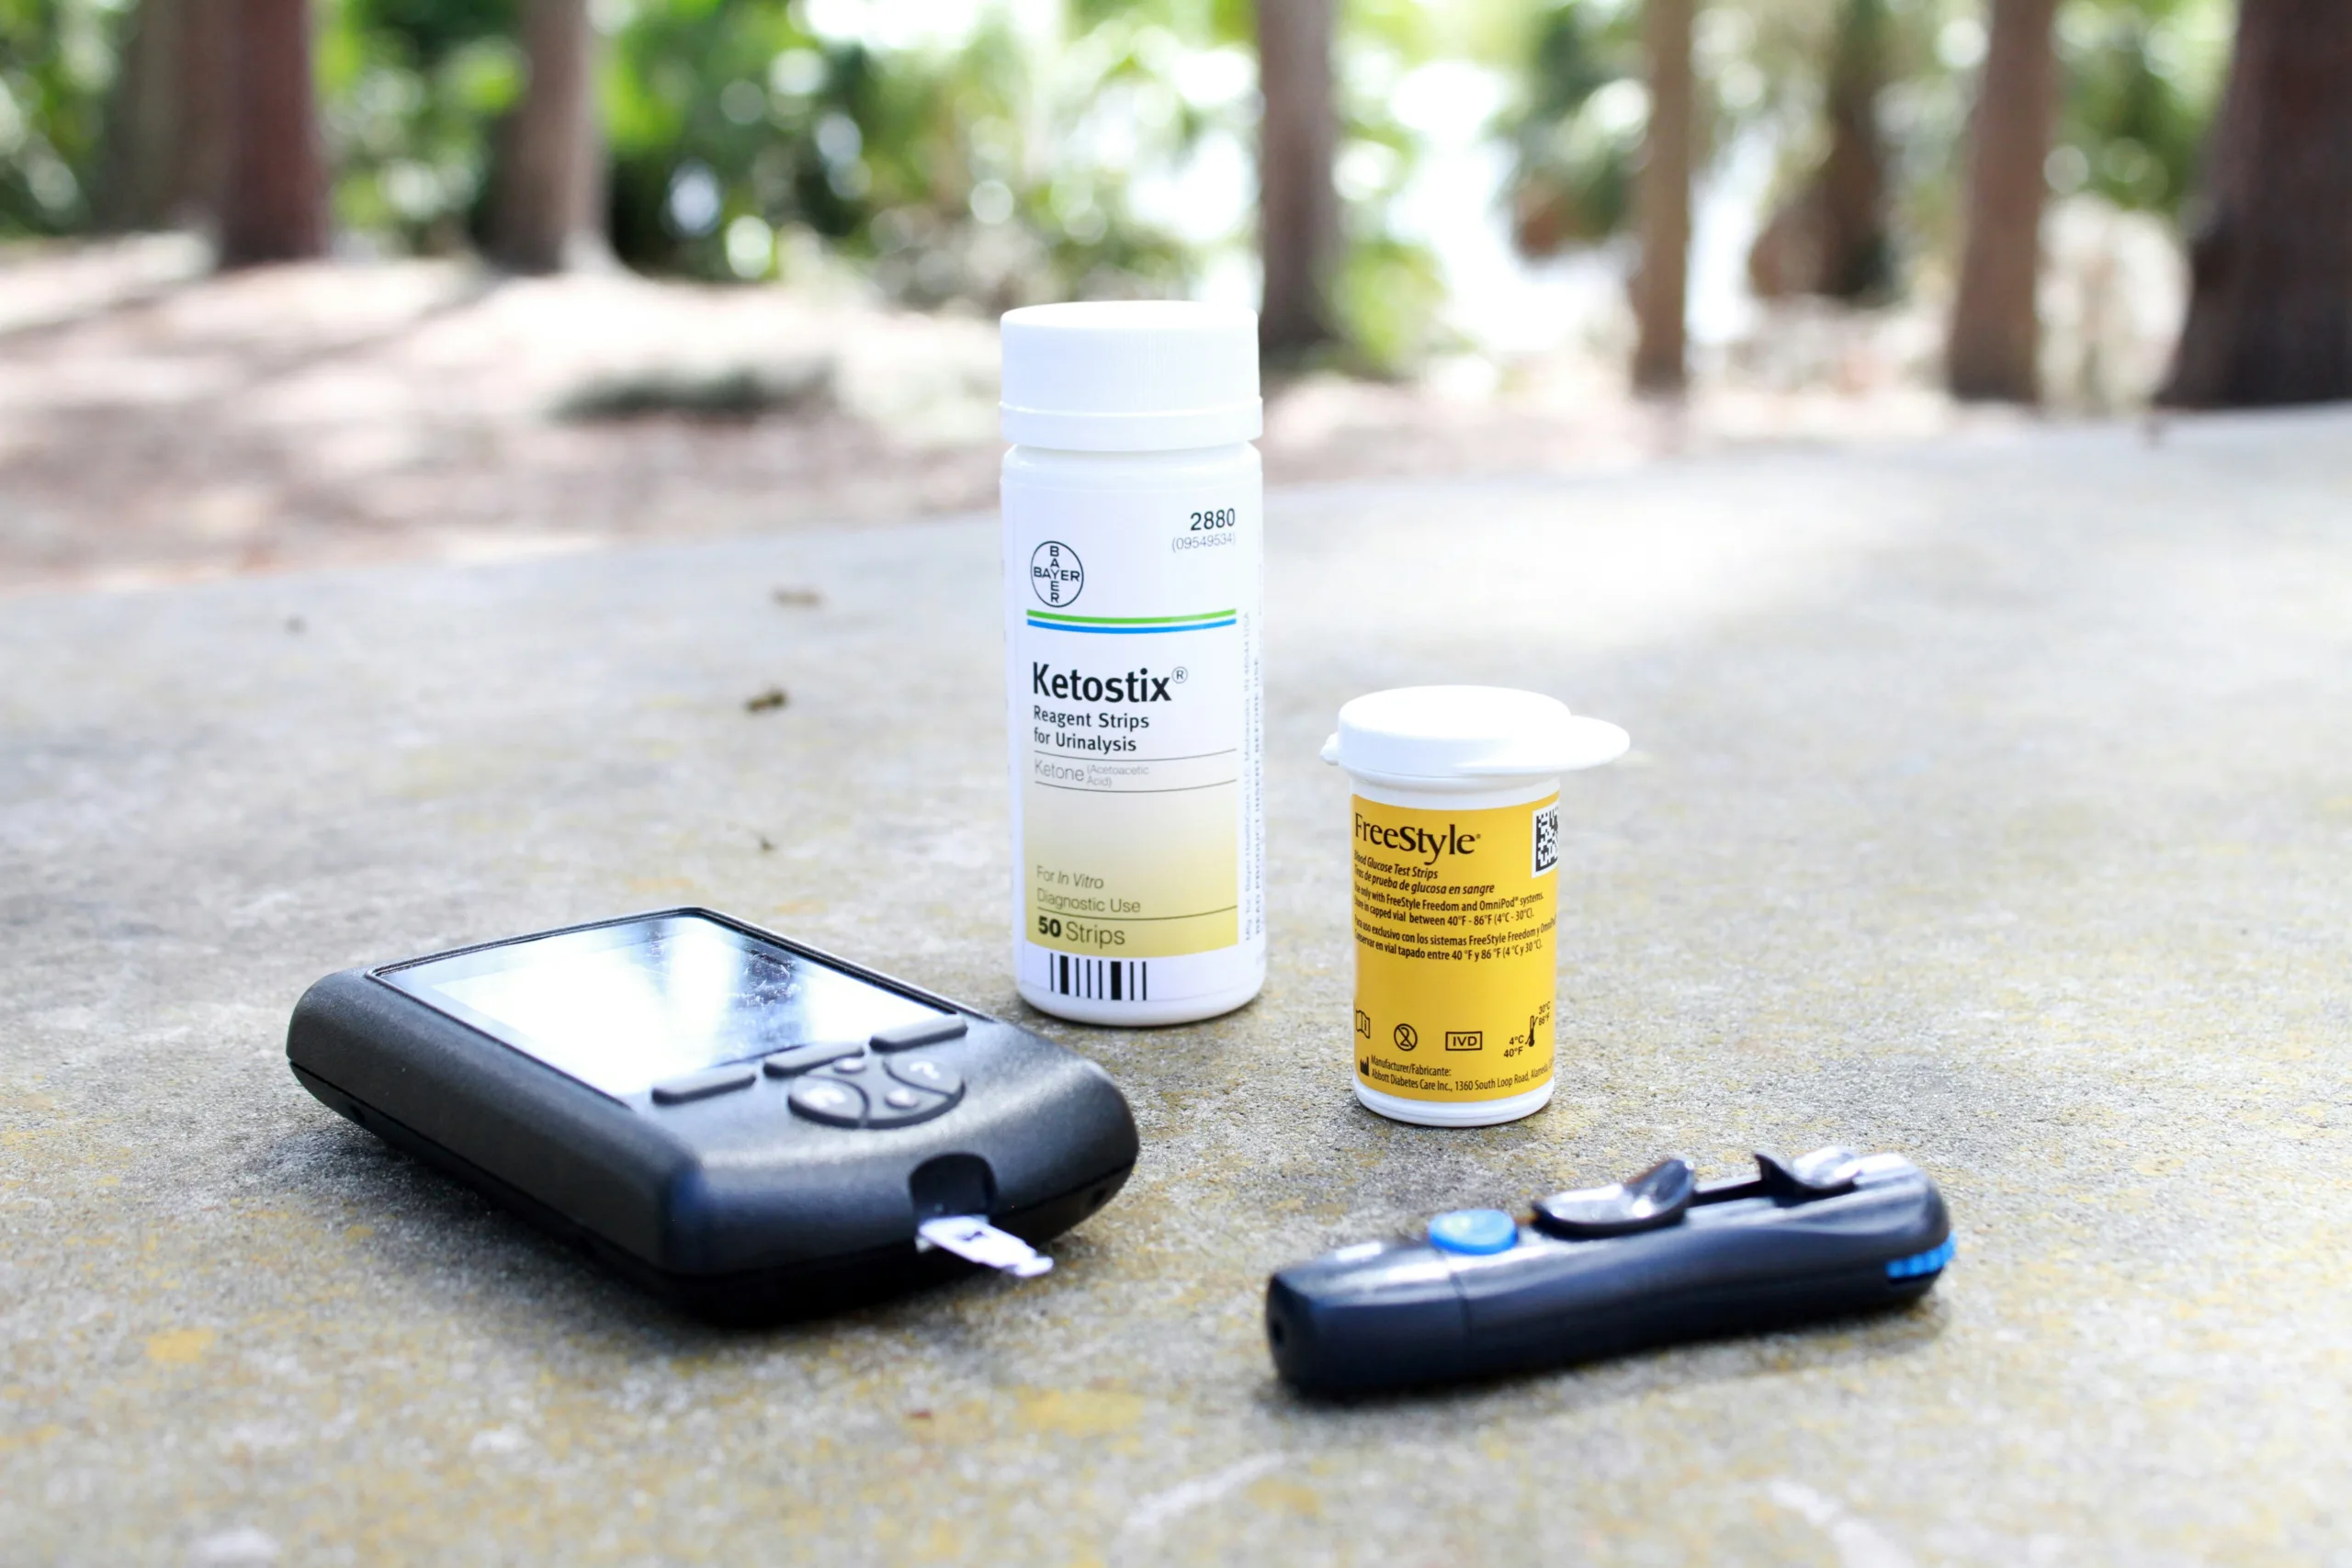 Top Tips for Navigating the Summer Heat with T1D